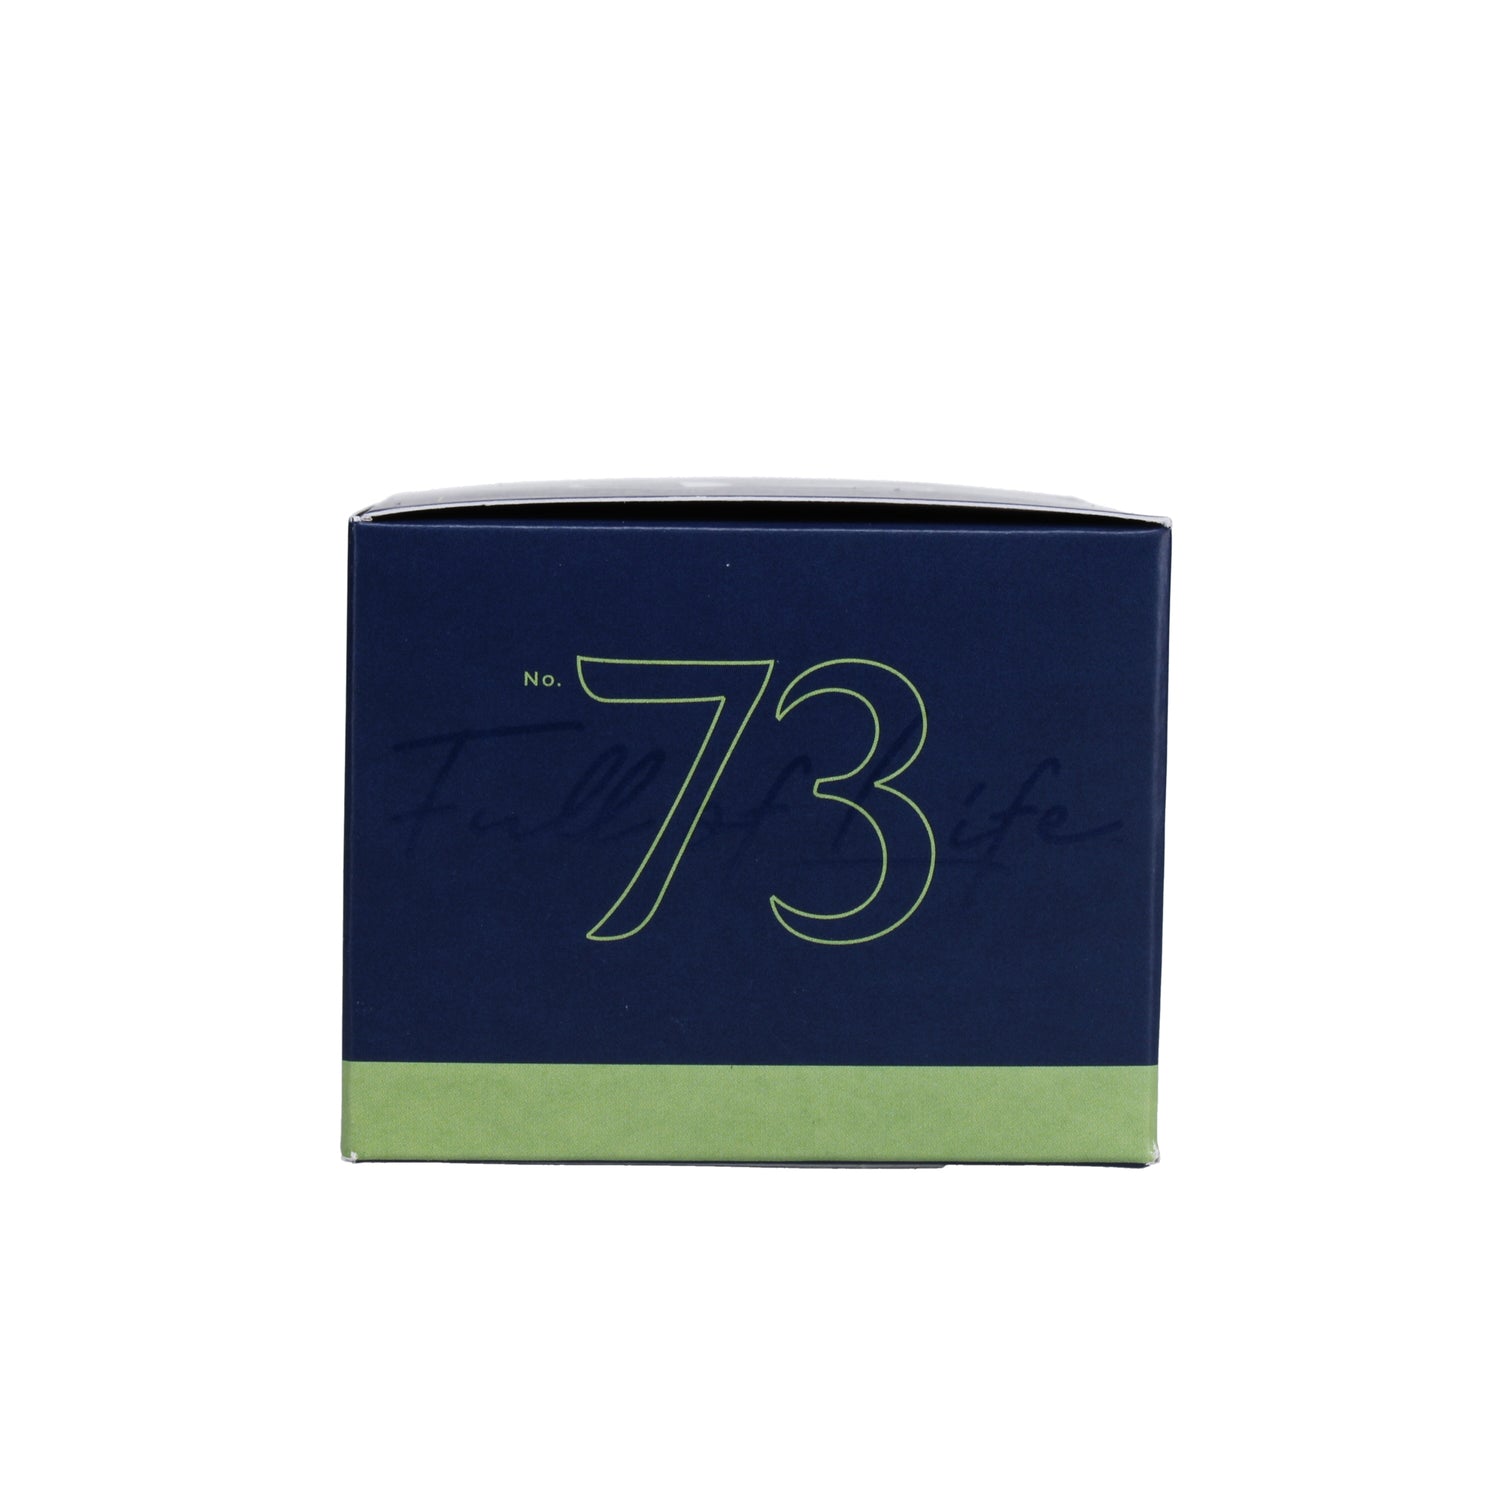 No. 73 Vetiver Seagrass 3.75 oz. Small Poured Candle Image 6